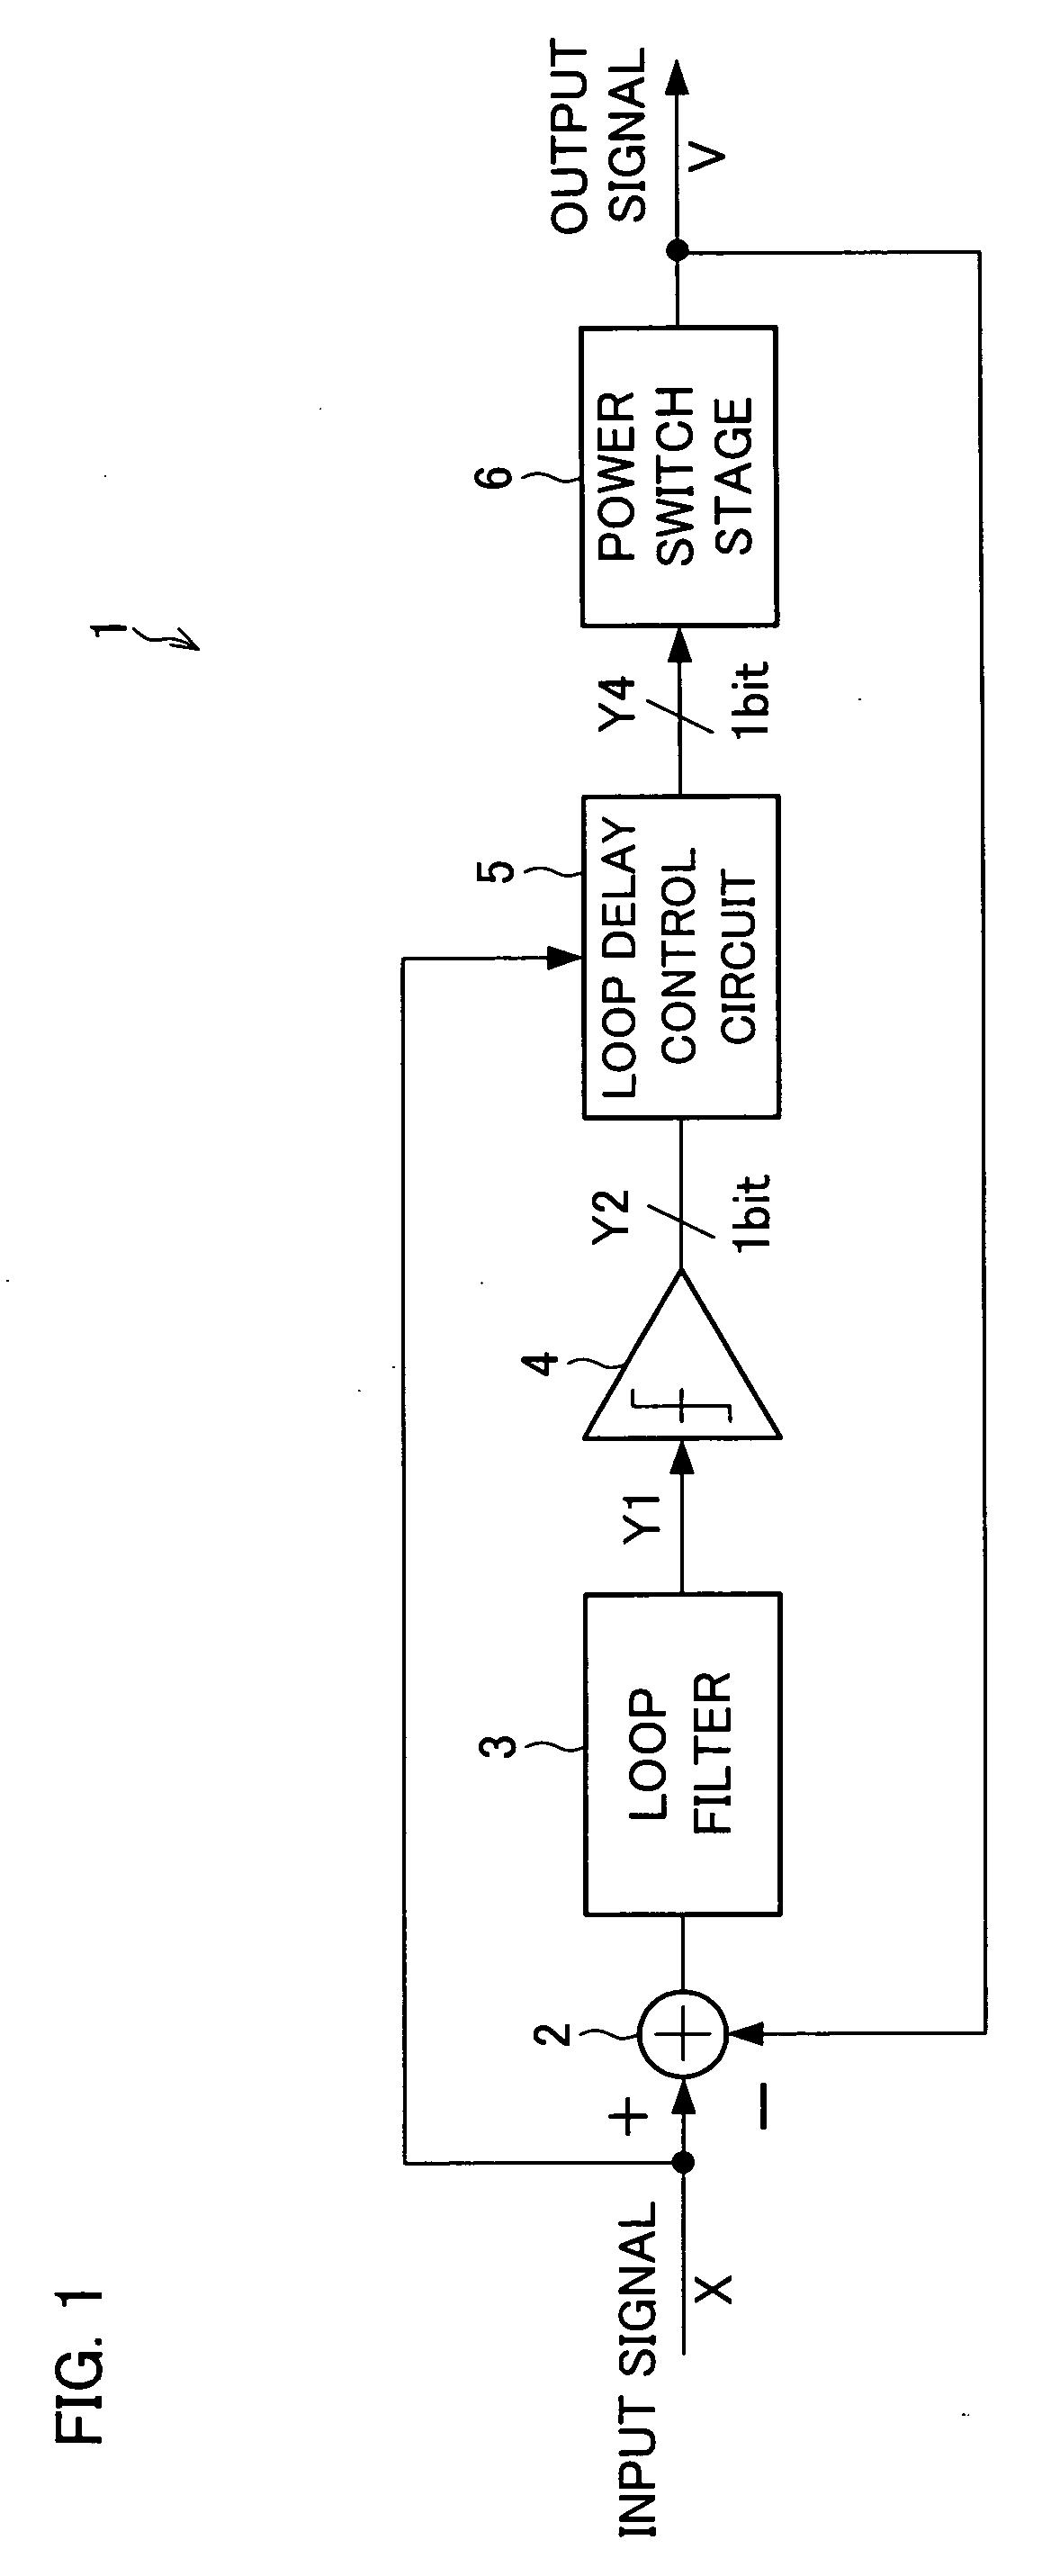 Delta-sigma modulator and its application to switching amplification circuit